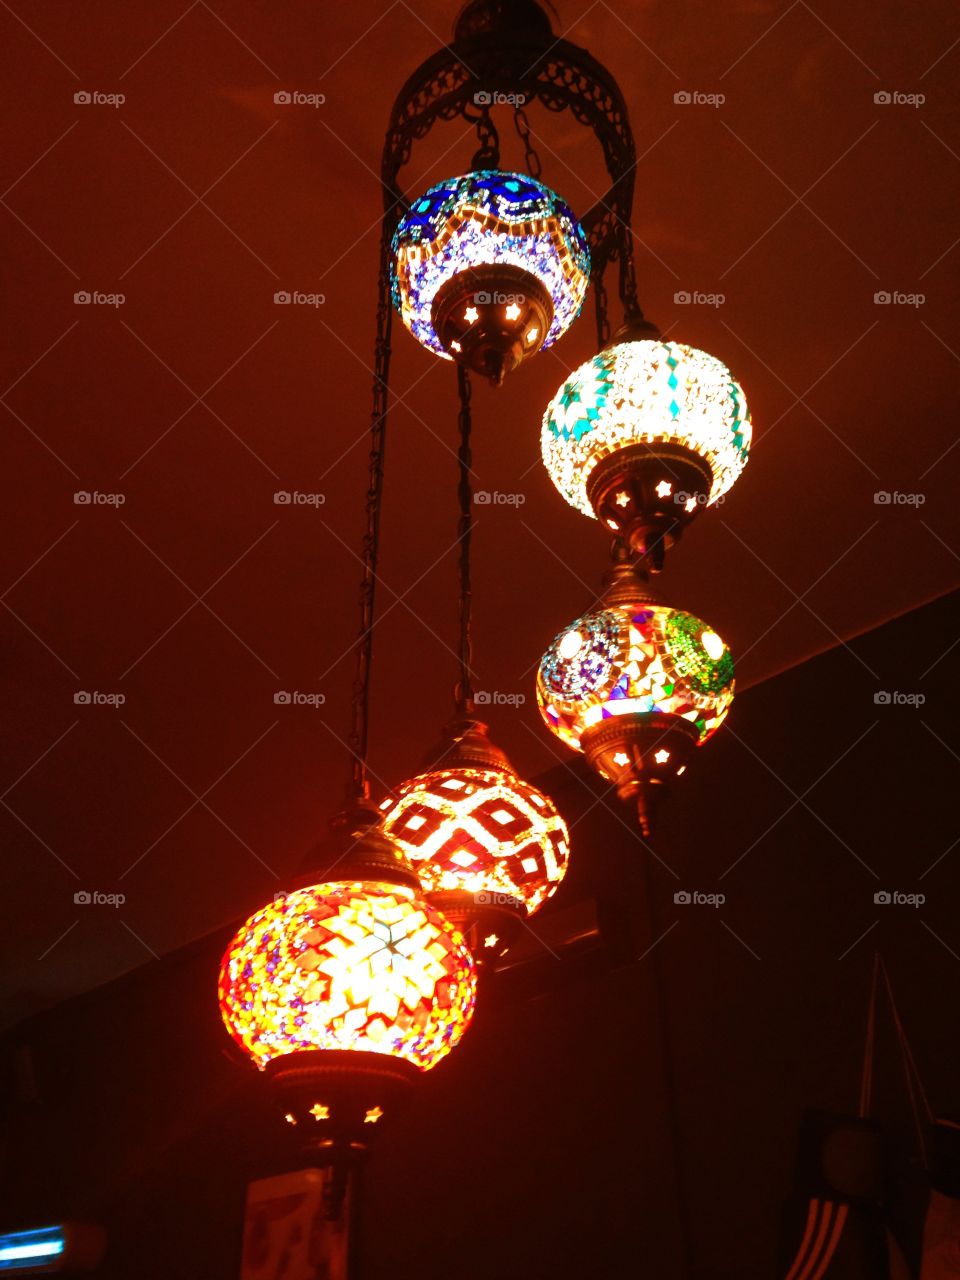 Arabian Lamps. Saw this at a restaurant I was at. I love lamps like these. Do you?